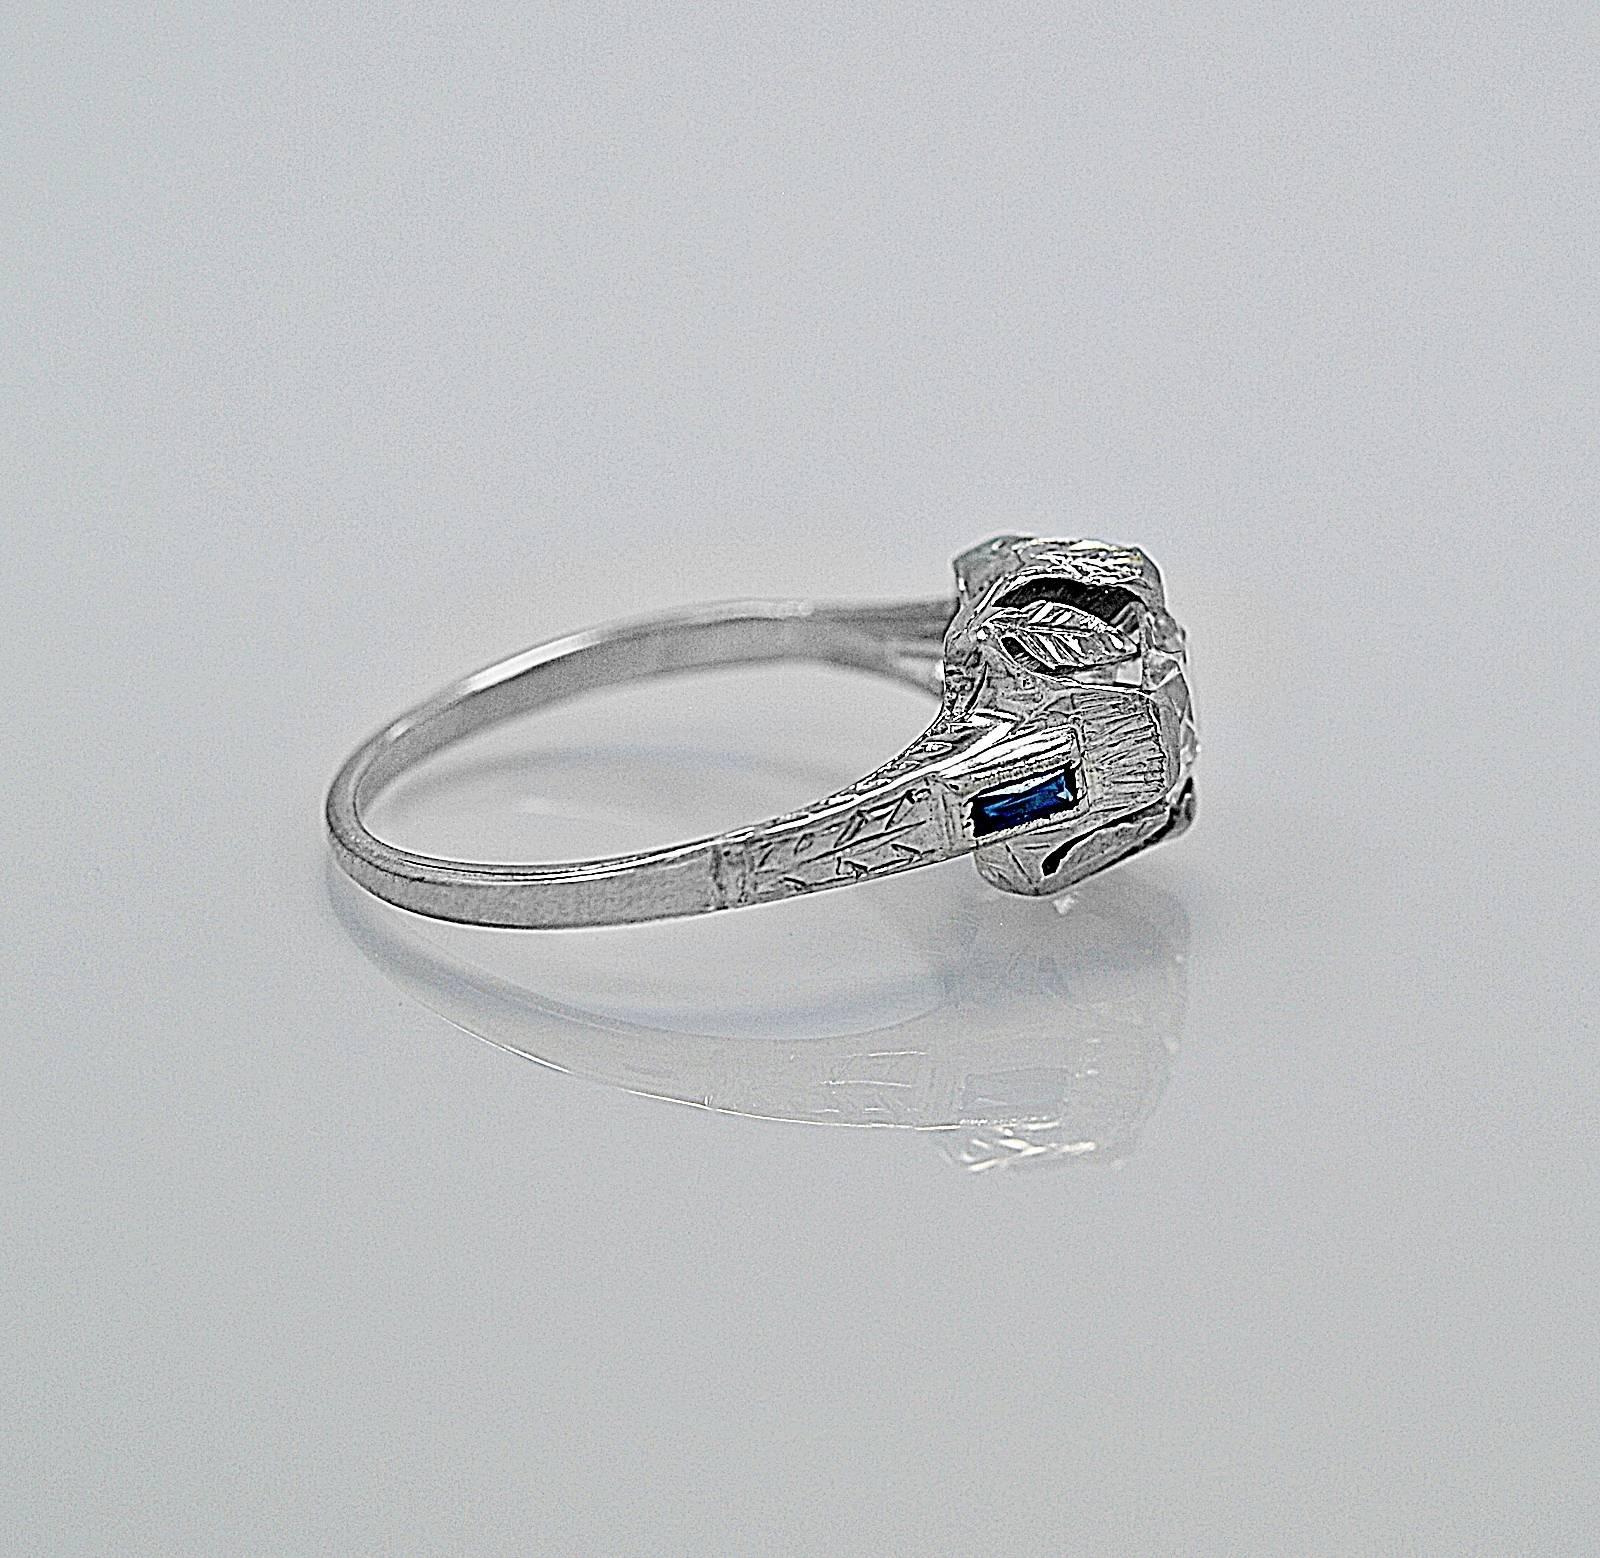 An artistically designed antique engagement ring crafted in 18K white gold and features a .89ct. apx. European cut center diamond with SI1 clarity and H-I color. The mounting is exceptional with piercings and engraving. Notice the leaves that are